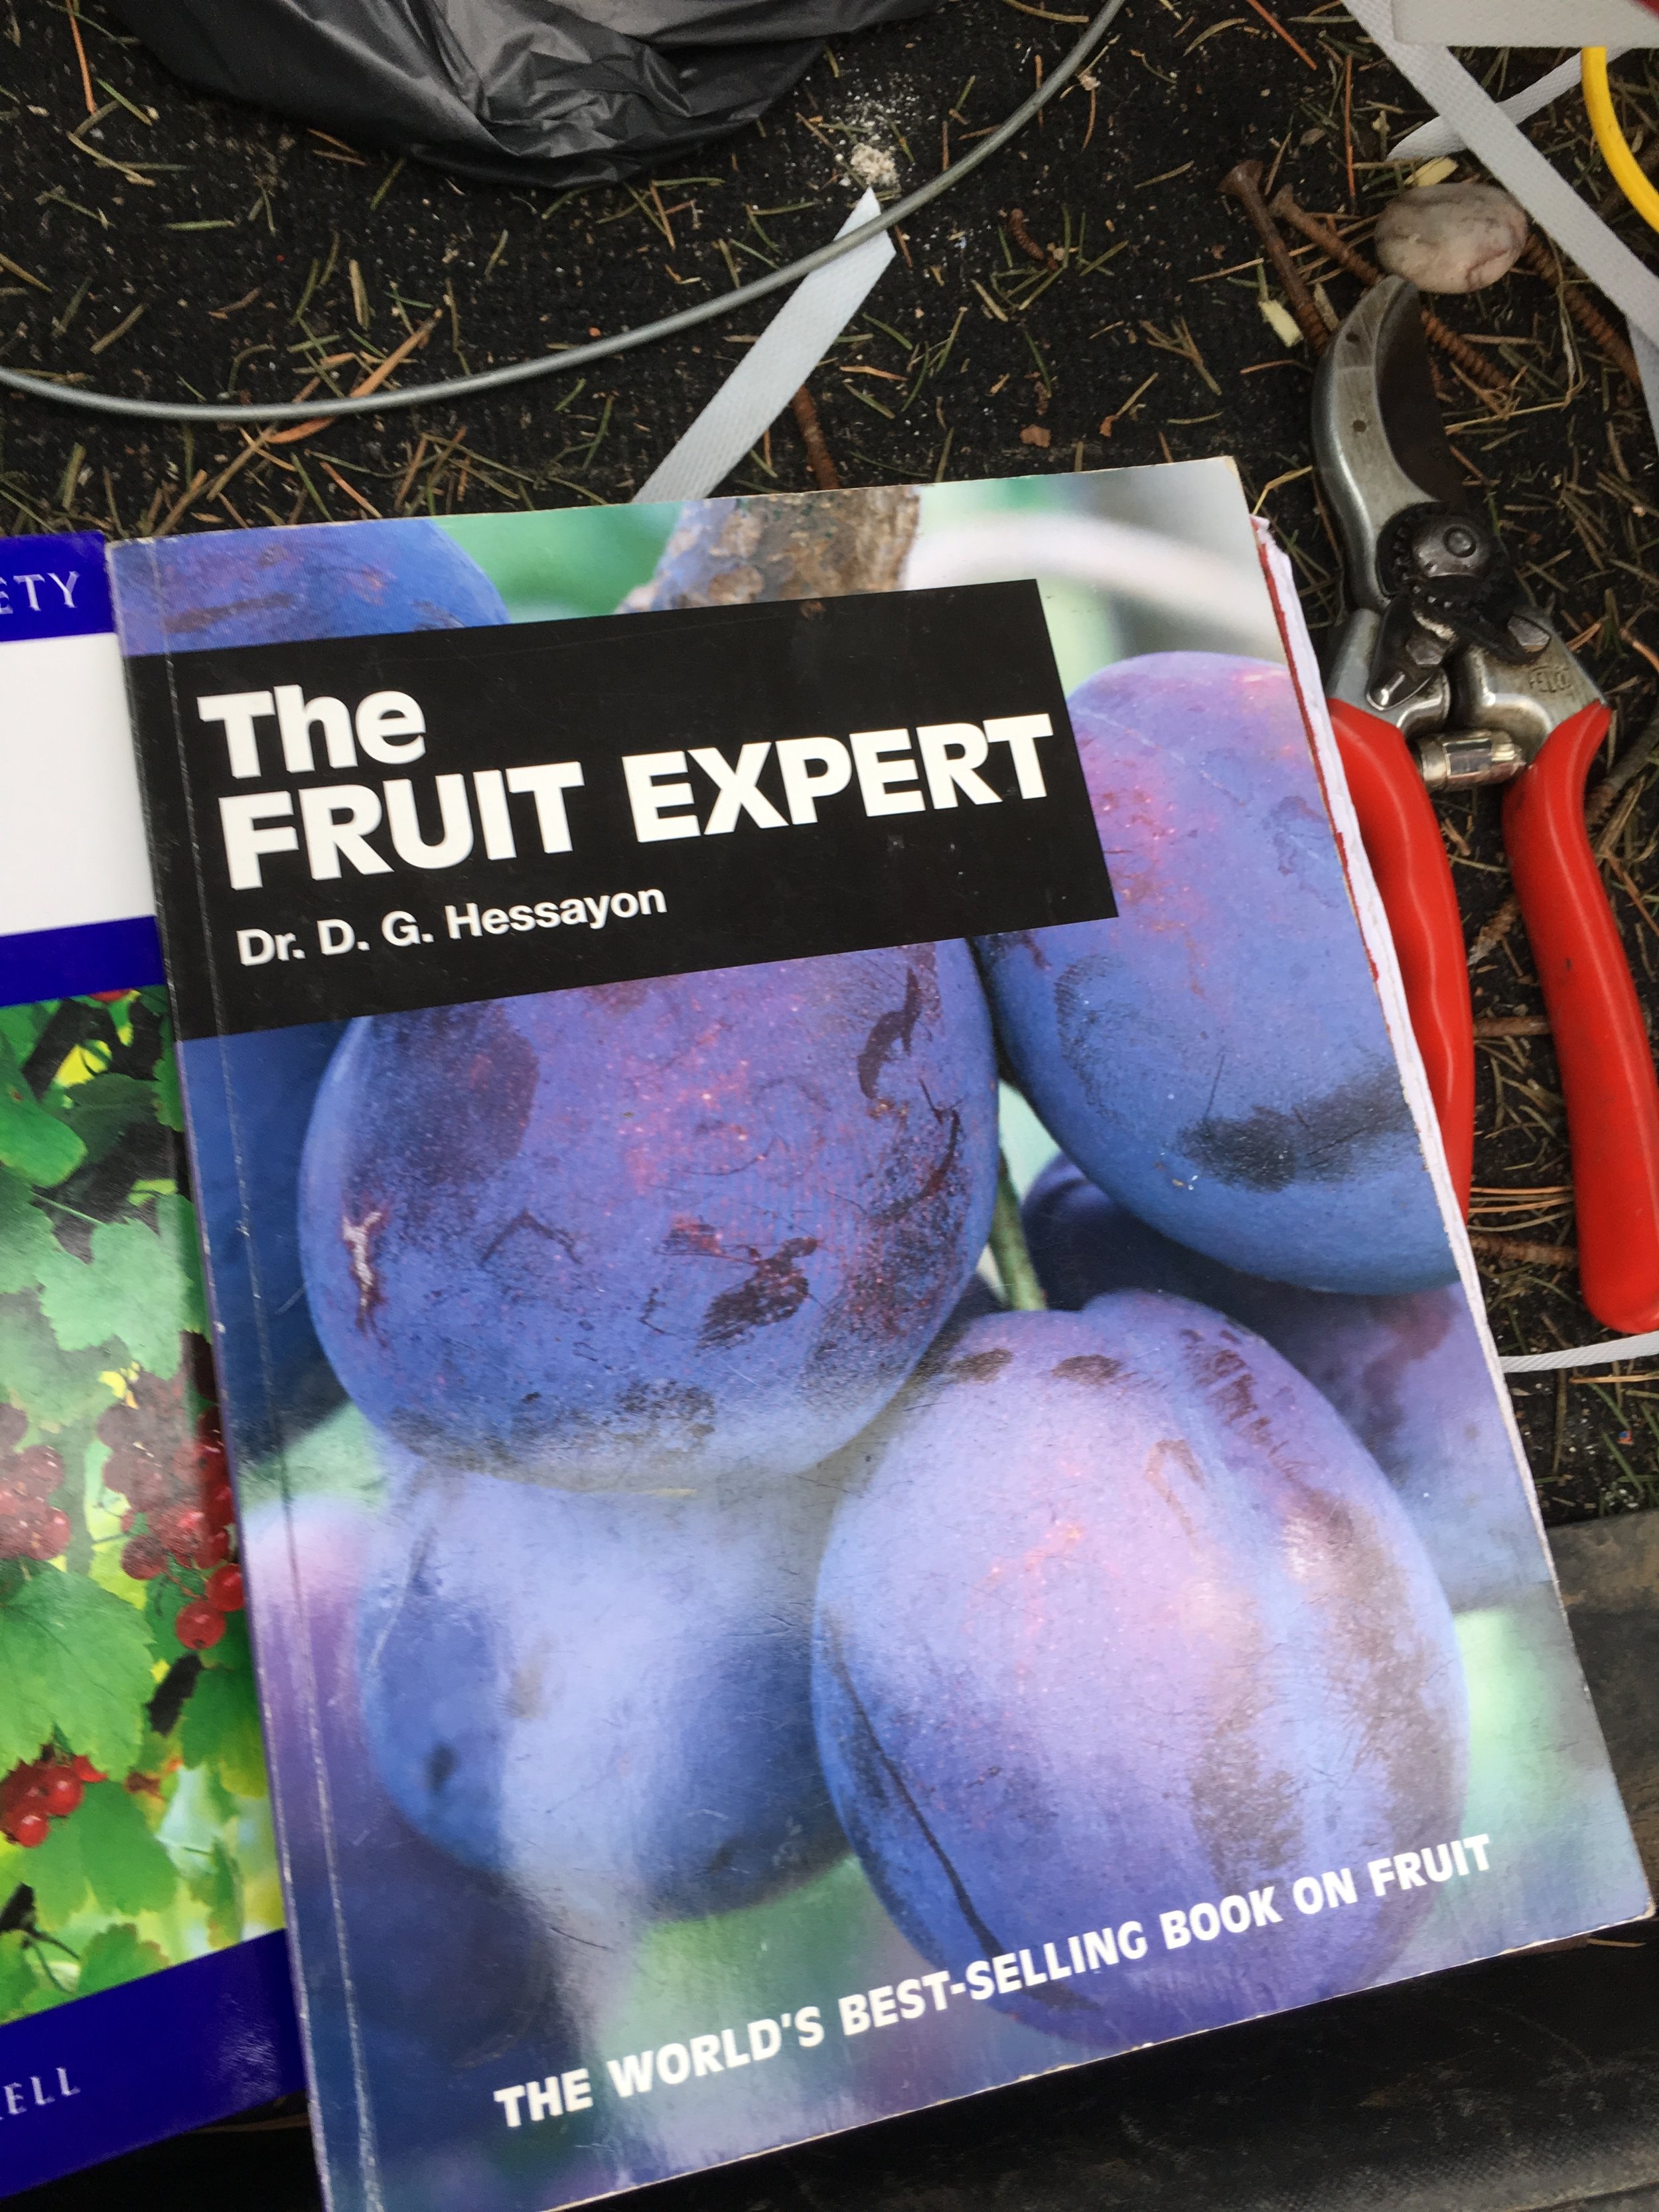 The fruit expert- a book with great pruning advice